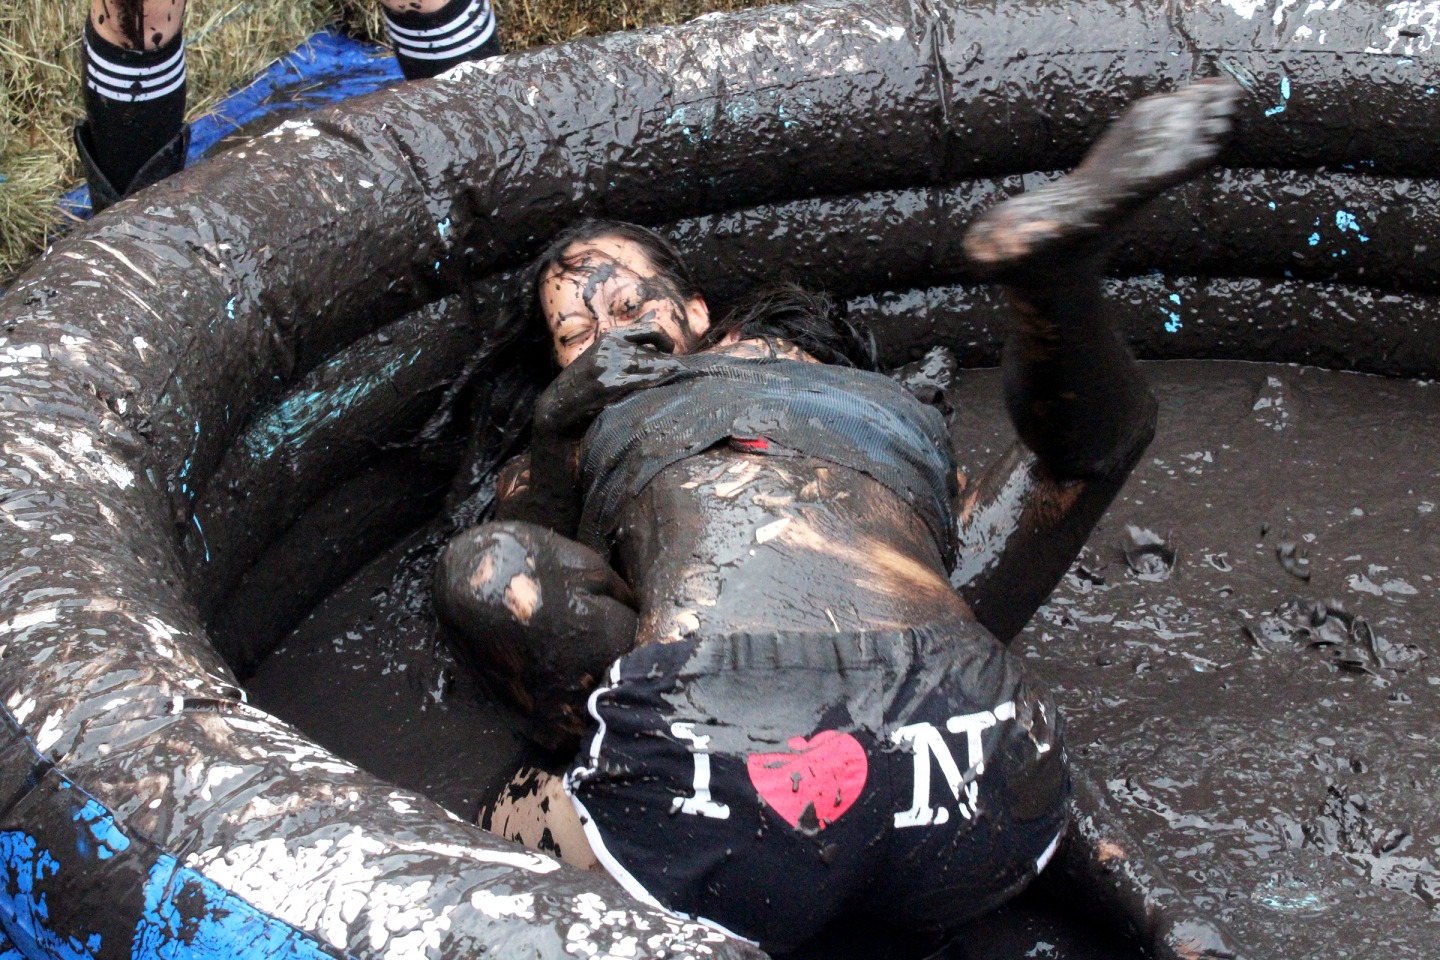 The Great American Mud Wrestling Show is the sexy, trashy punk party of your dreams